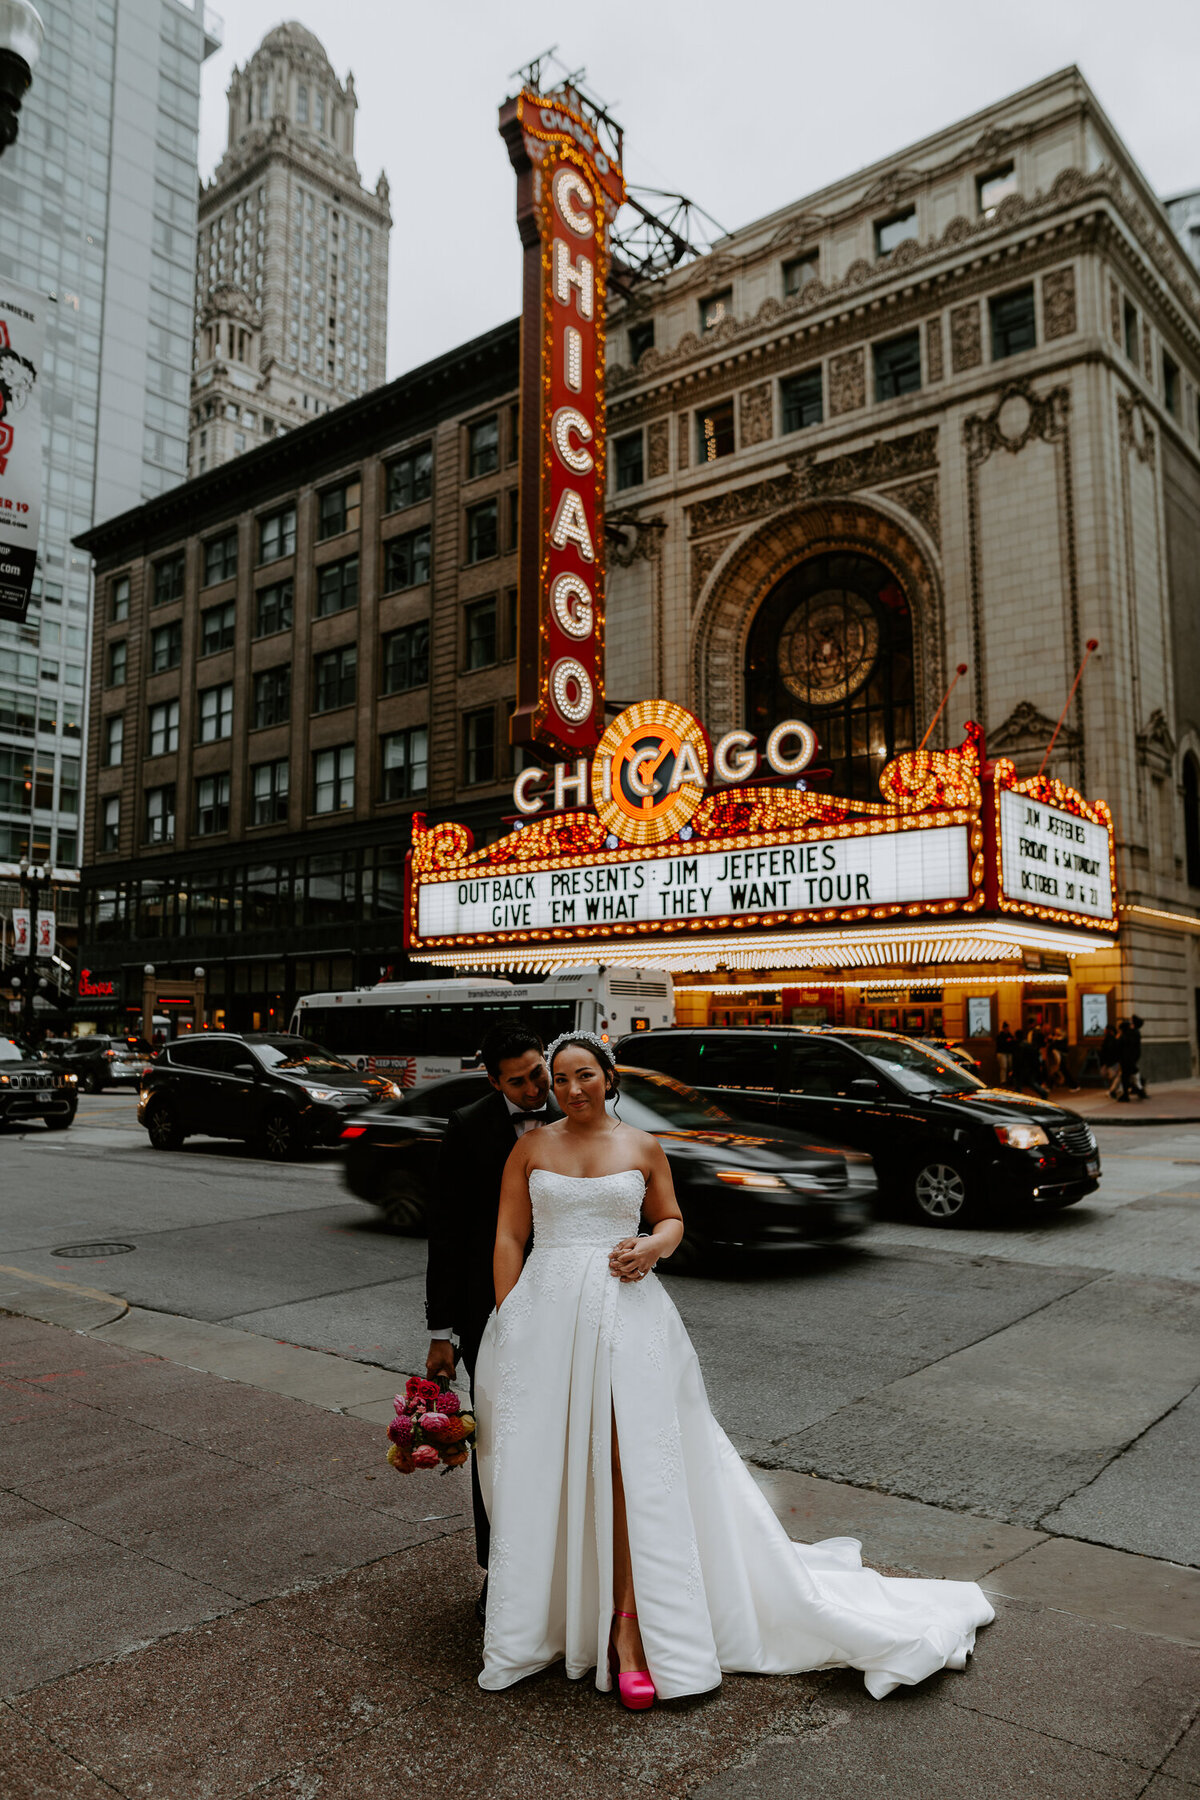 A Bride and Groom stand in front of the Chicago Theatre on their wedding day.